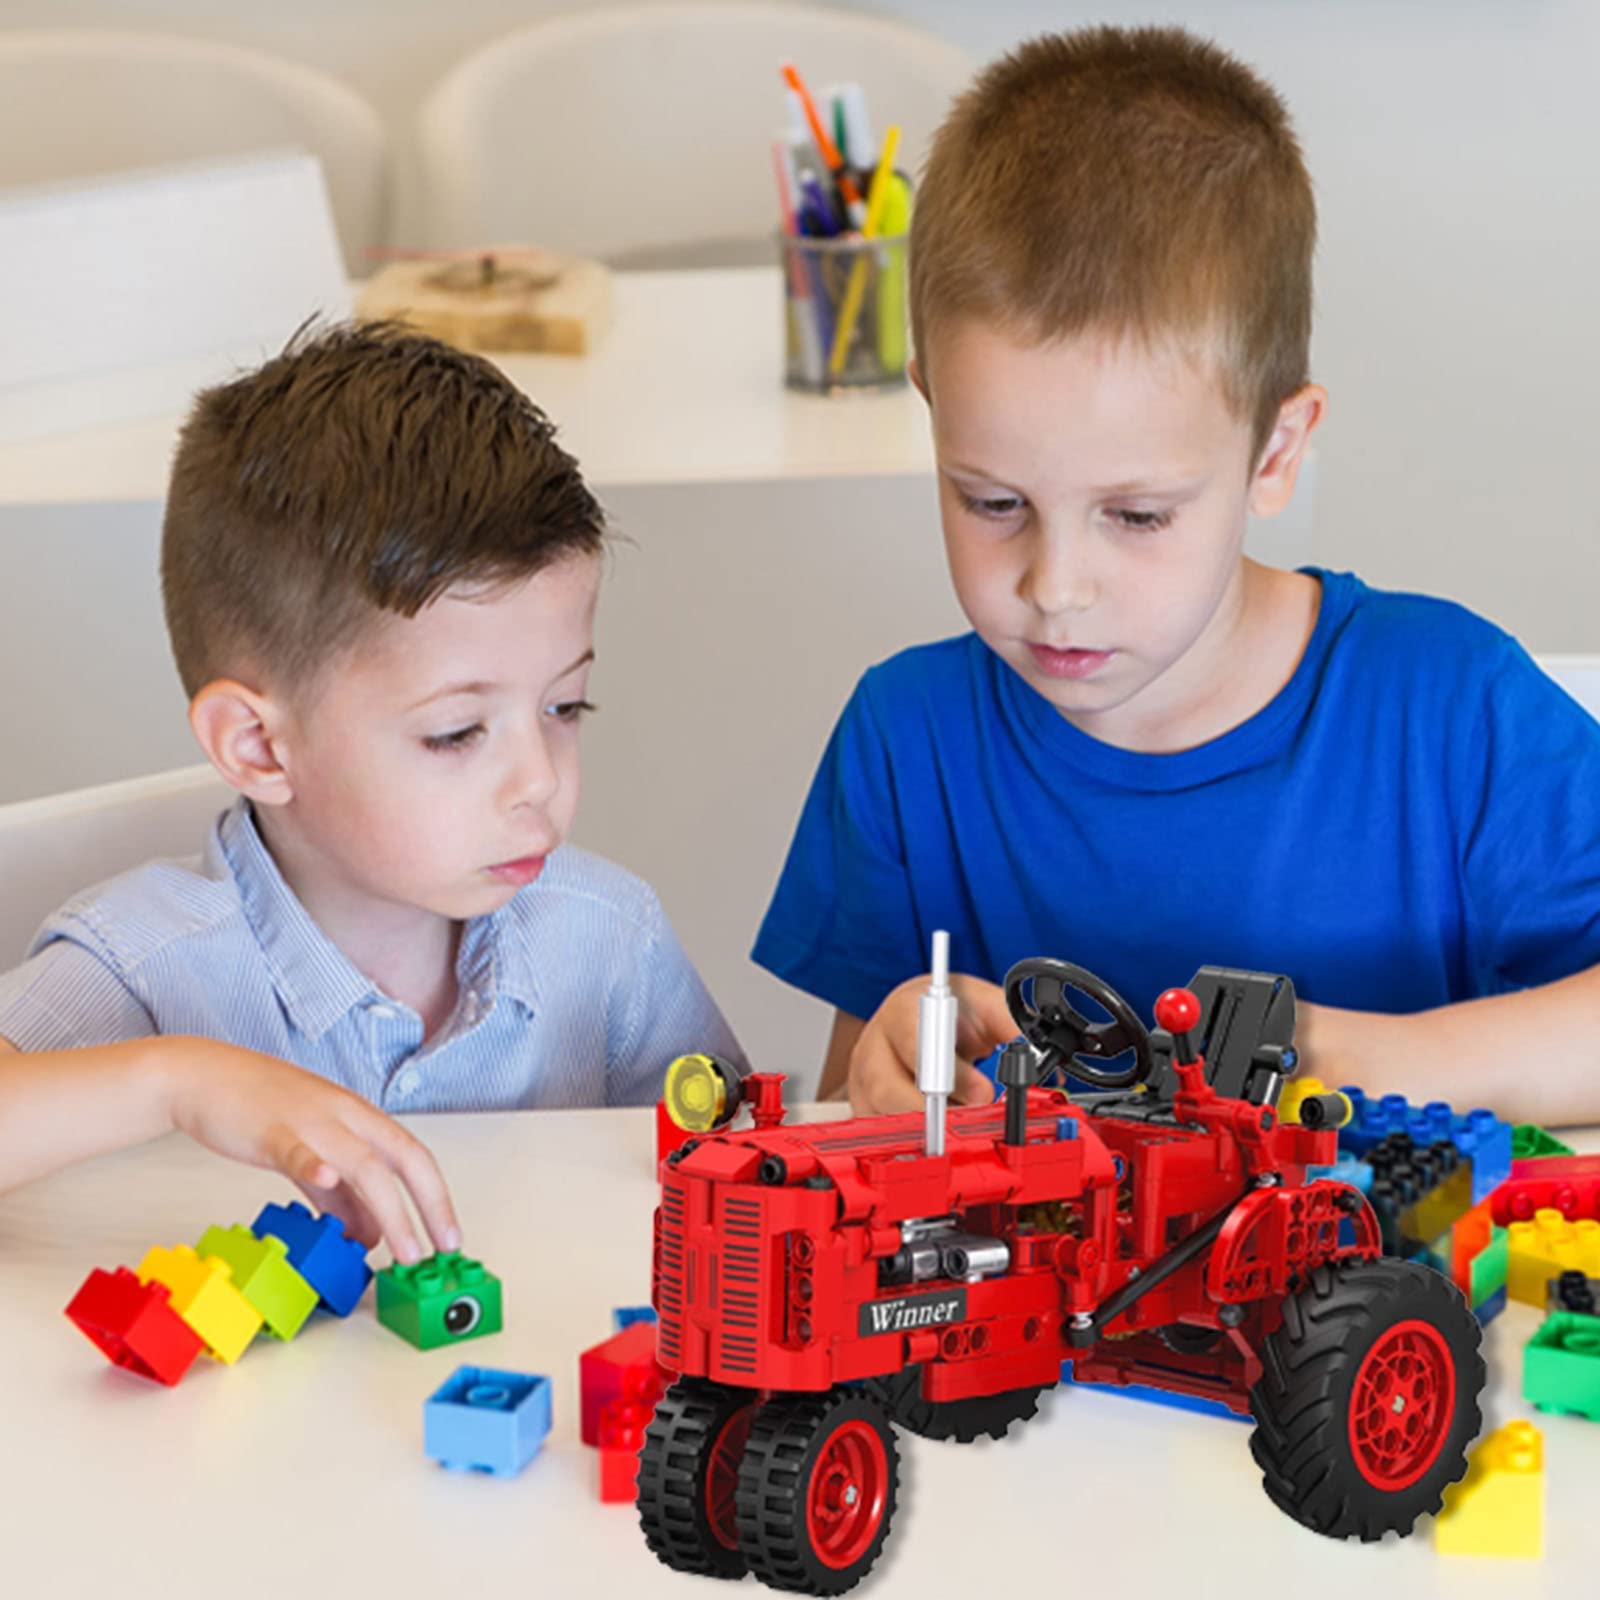 A XINAO TOYS Classic Building Blocks 1/12 Red Tractor Farm Toy Building Set Gift for Kids Ages 6 7 8 9 10 11 12 Includes Shifting Structure, Steering Structure Features (Classic Edition)